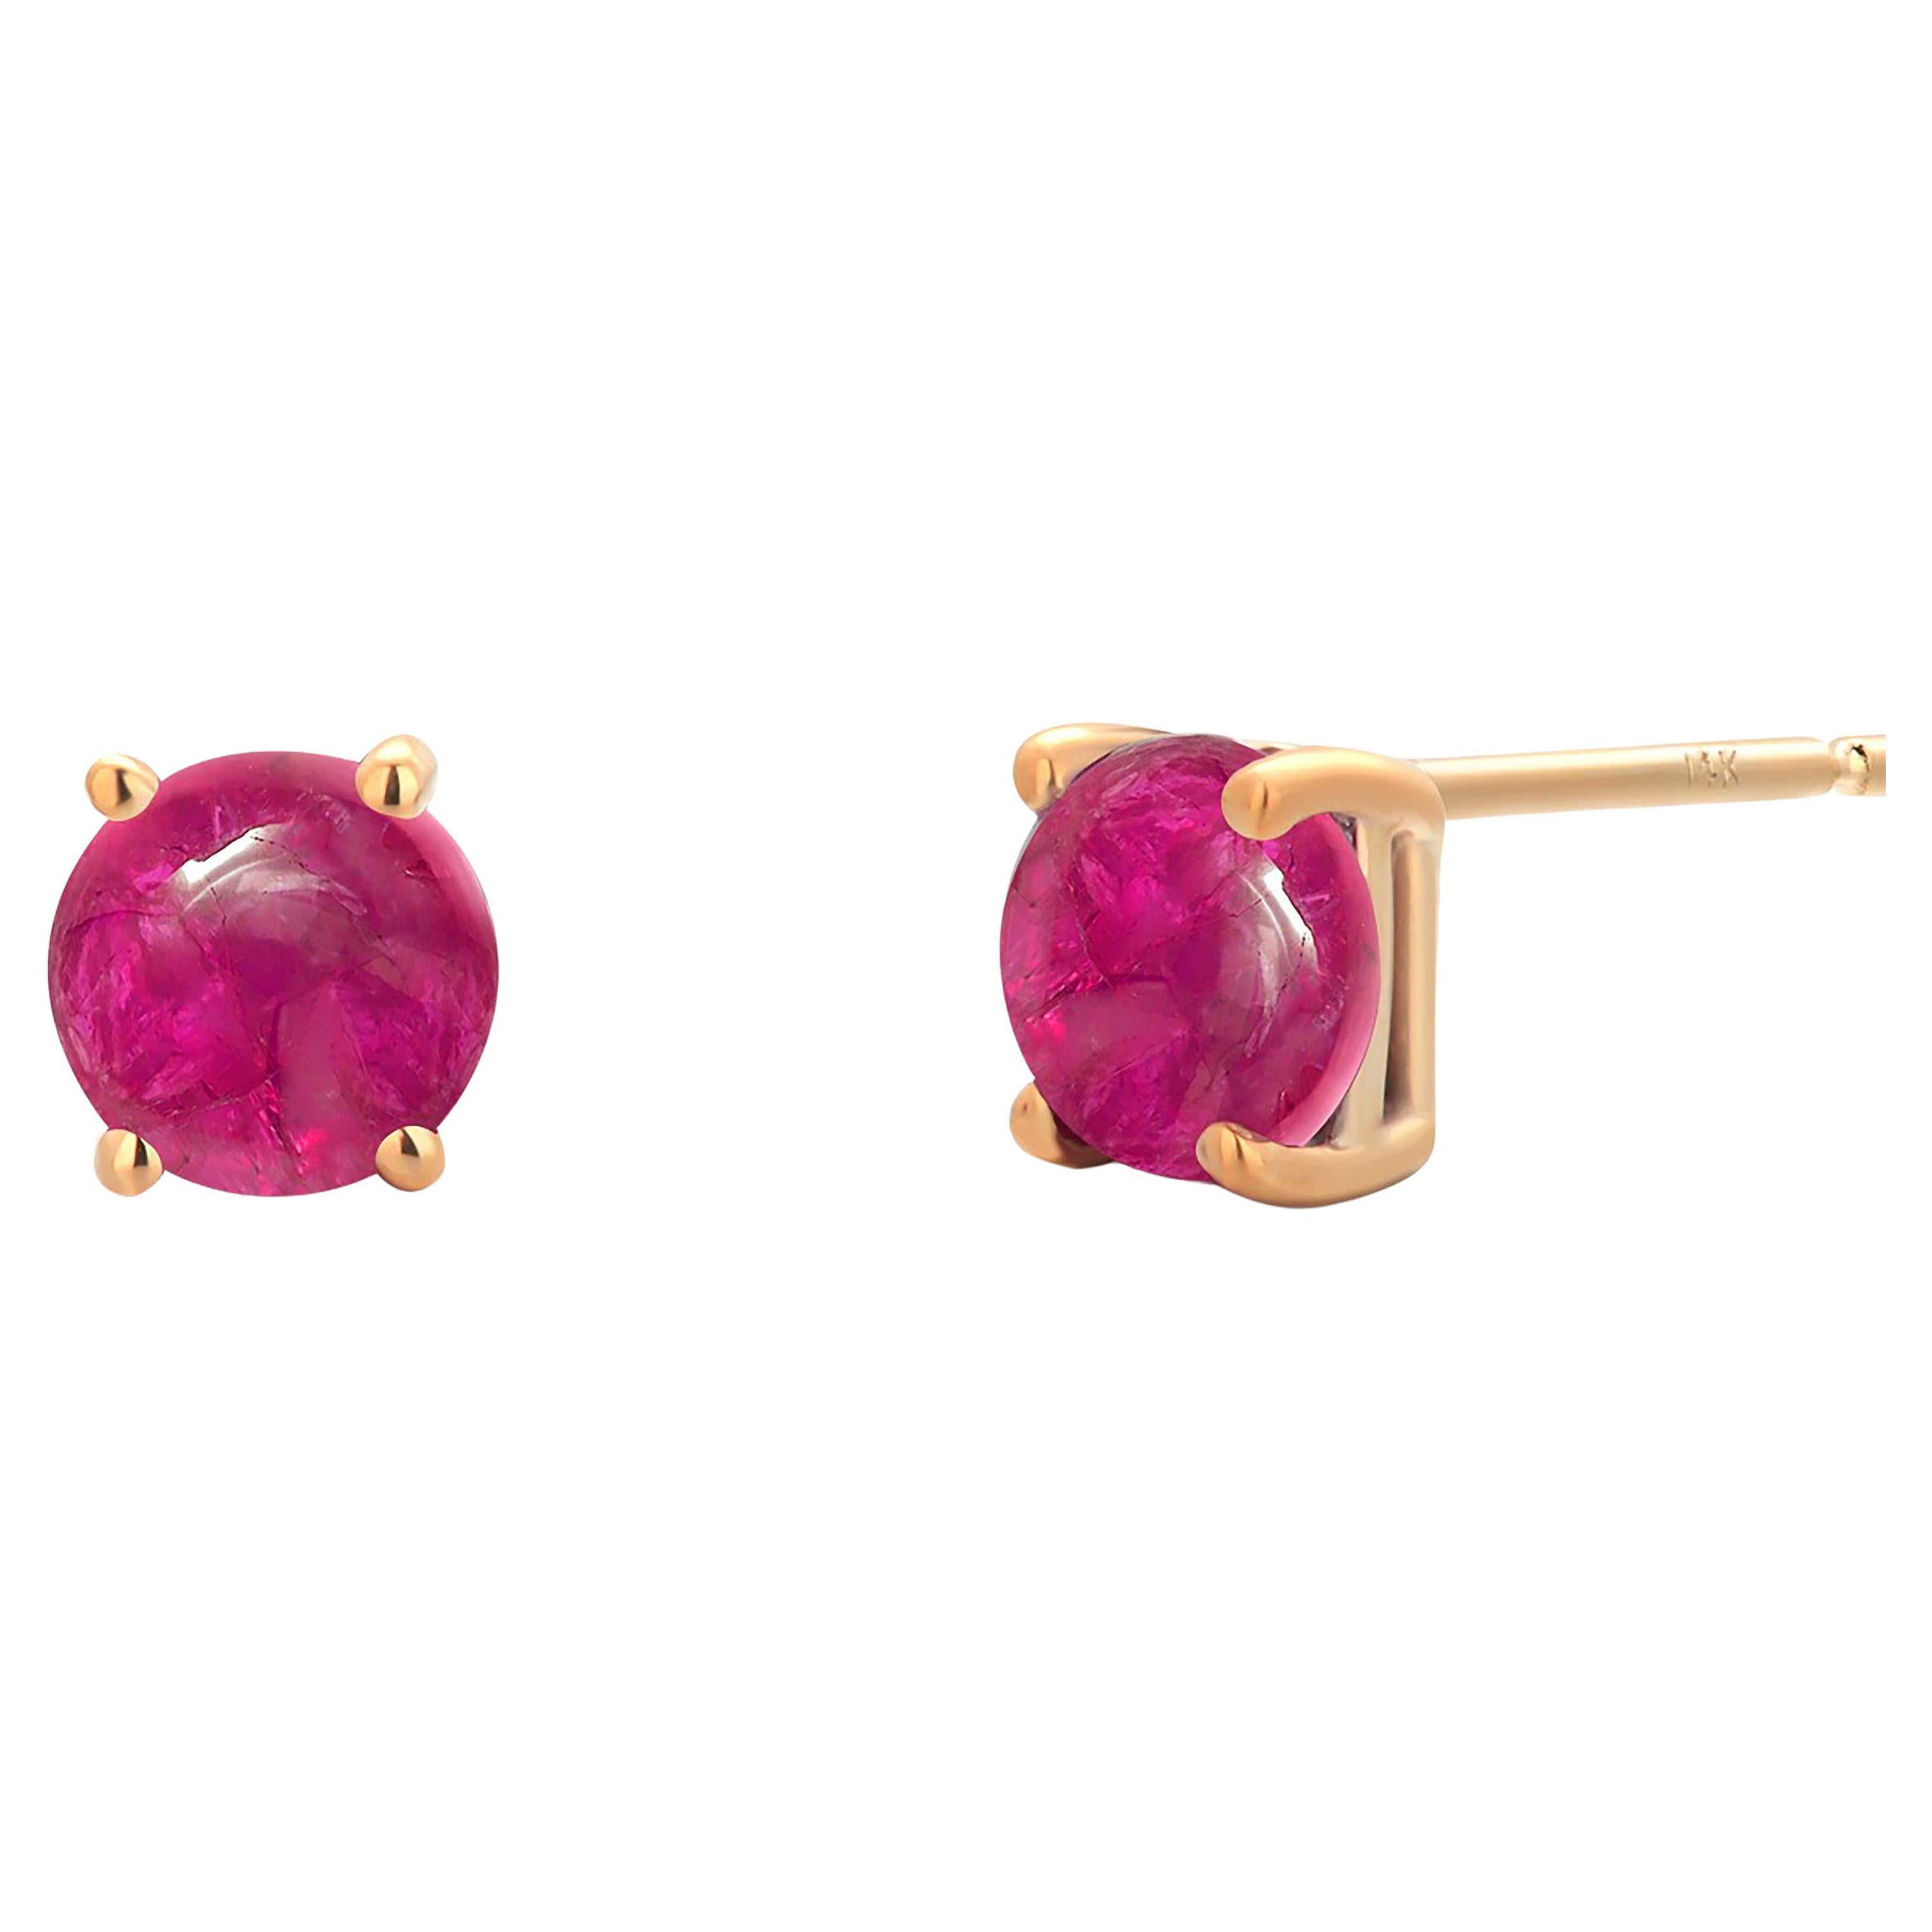 Two Matched Cabochon Rubies Weighing 1.65 Carat 0.23 Inch Yellow Gold Earrings